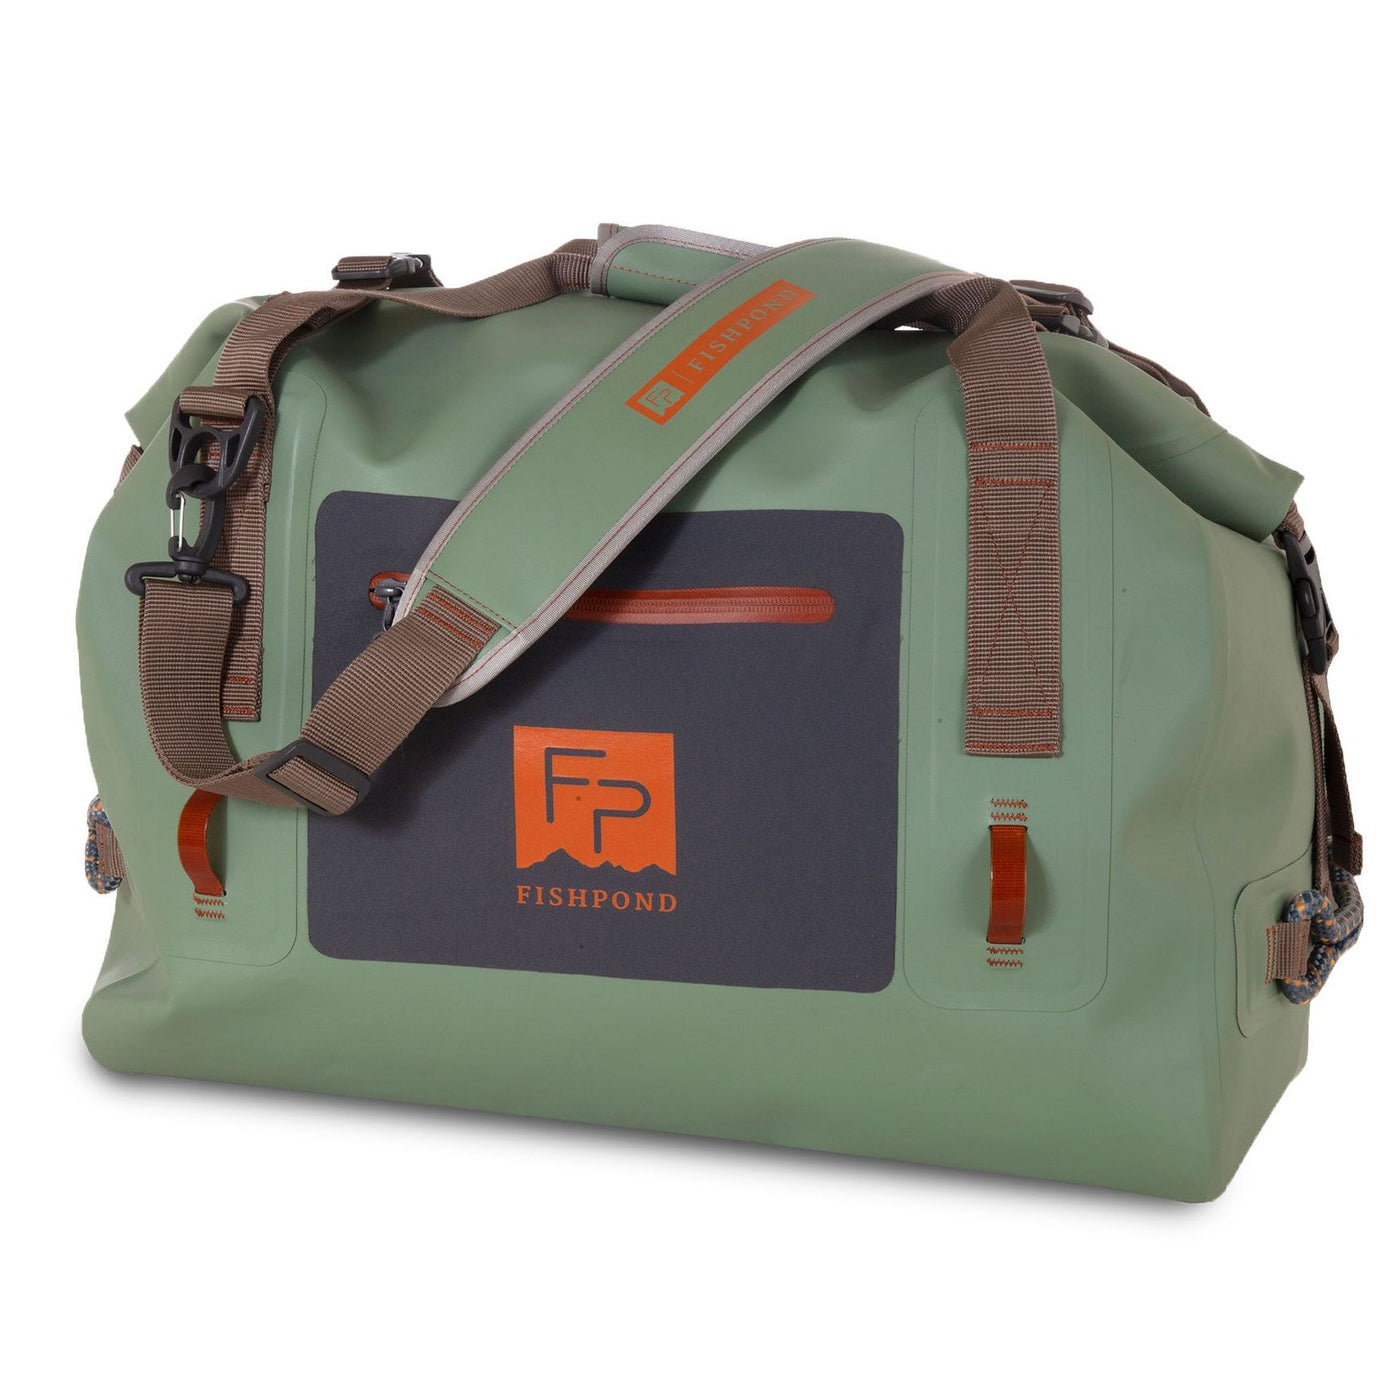 Gear Review - Fishpond Packs & Bags - The Fly Shop